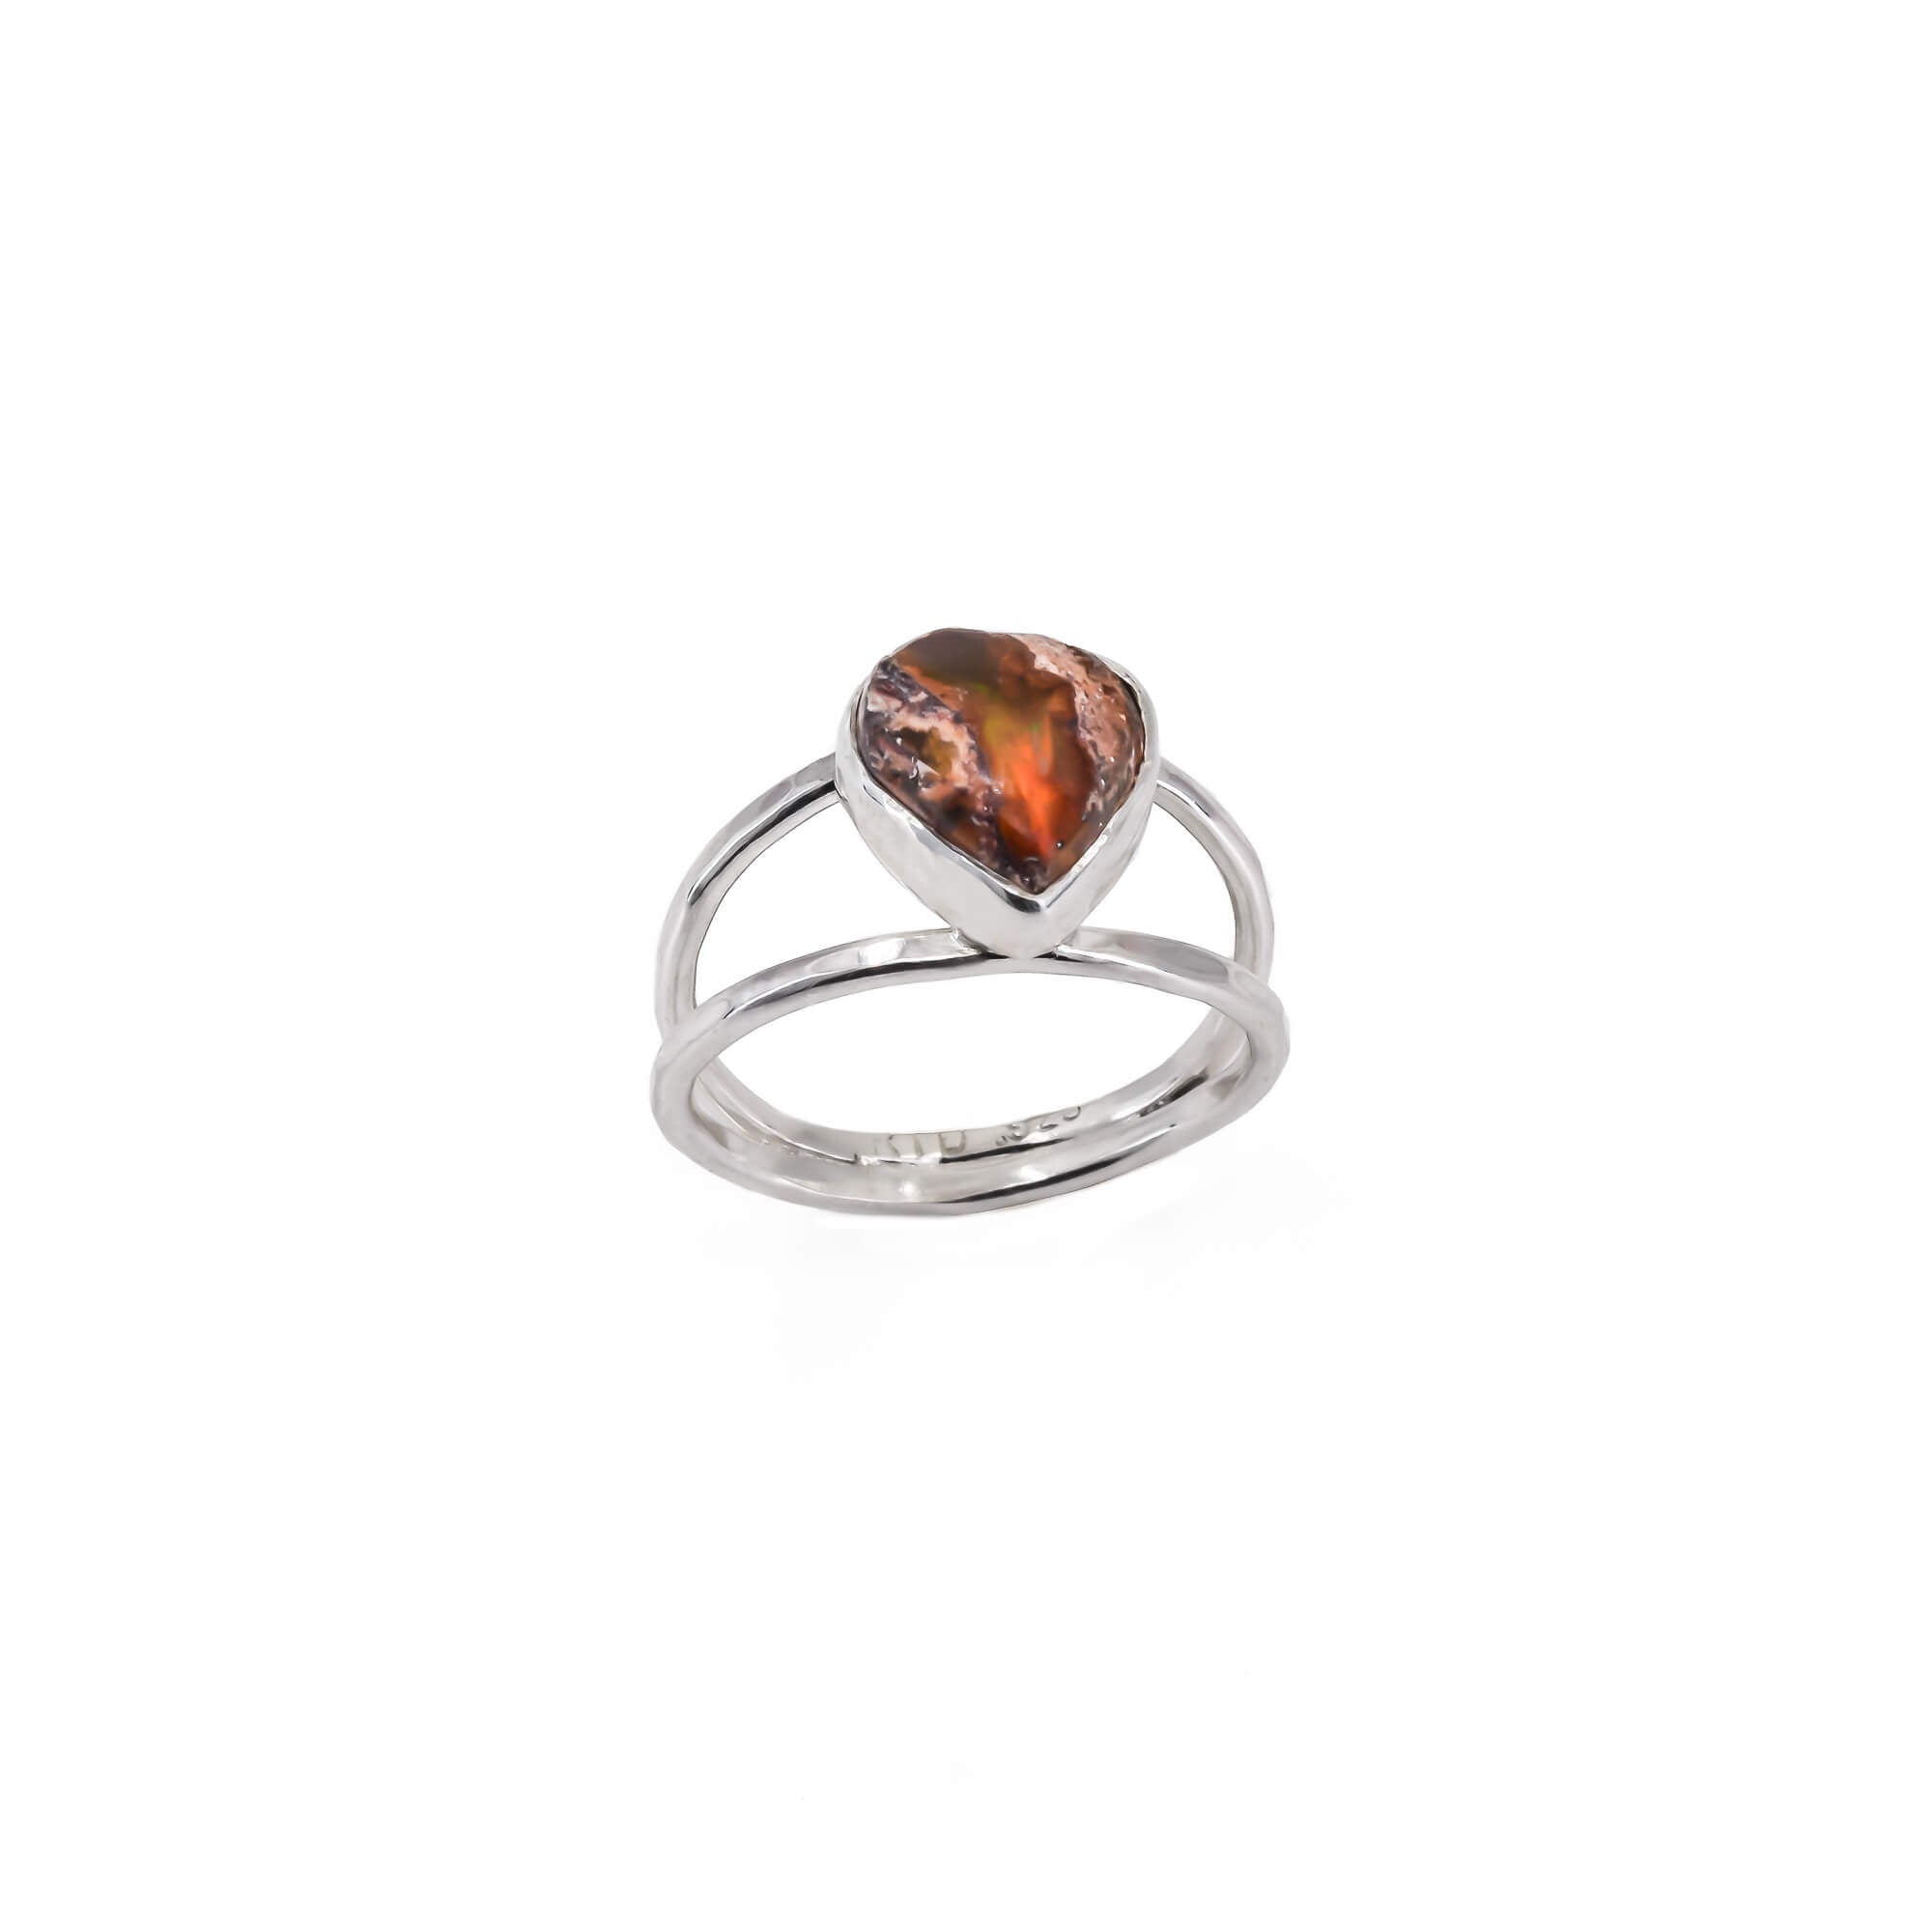 Cantera opal in a heart shape in a sterling silver ring, which has a textured double band.